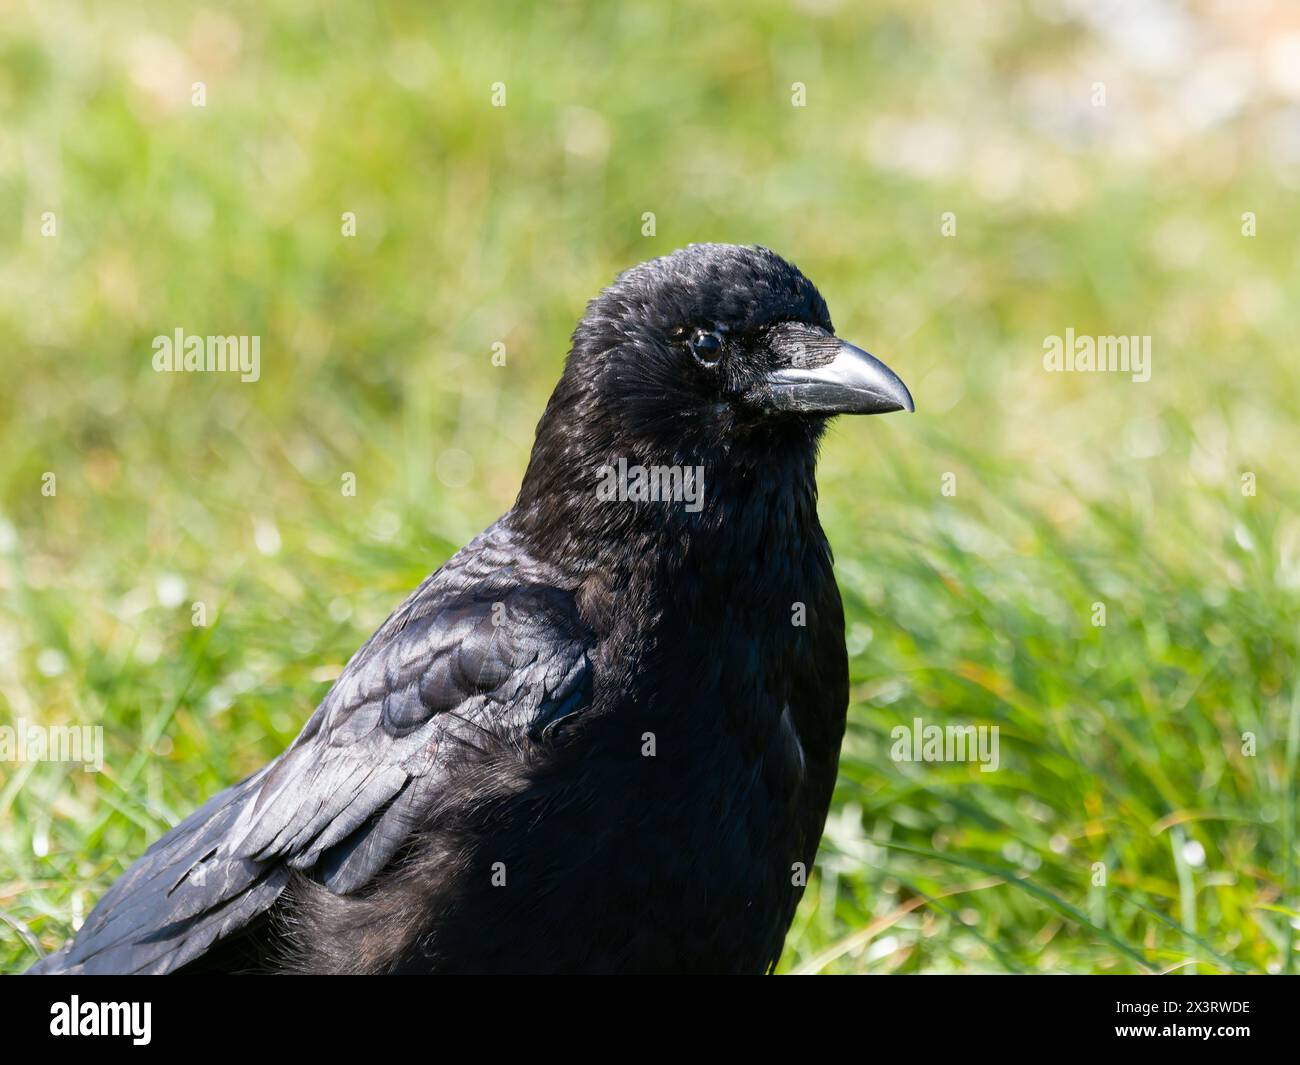 The head and shoulders of a carrion crow, Corvus corone, standing on a grass field. Stock Photo